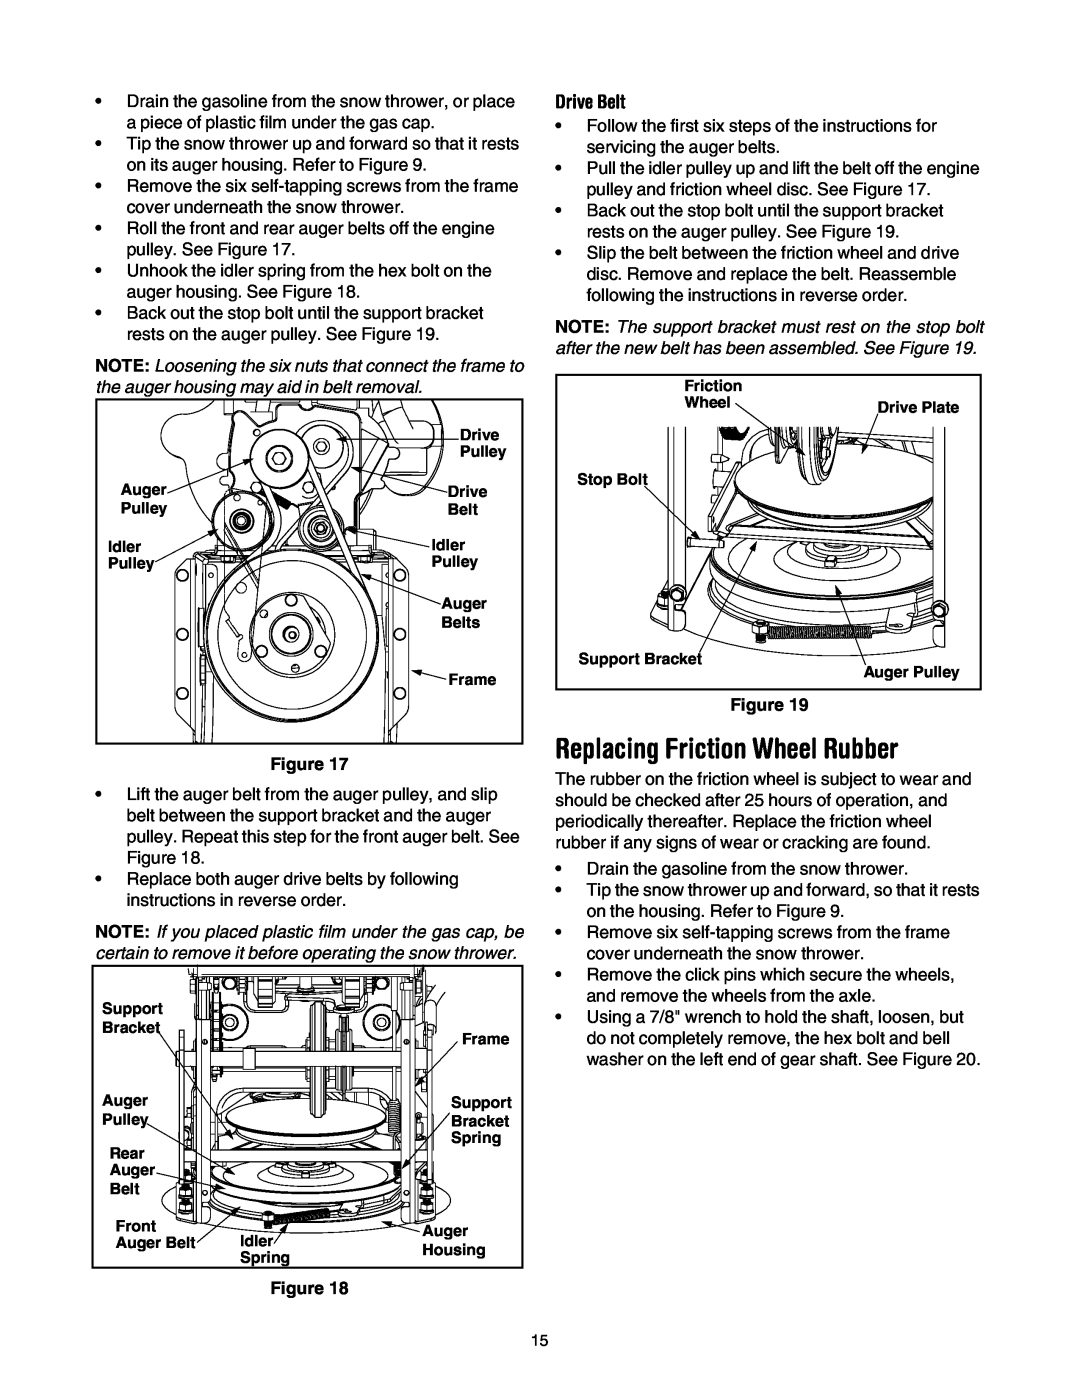 Troy-Bilt 1028, 1130 manual Replacing Friction Wheel Rubber, Drive Belt, belt between the support bracket and the auger 